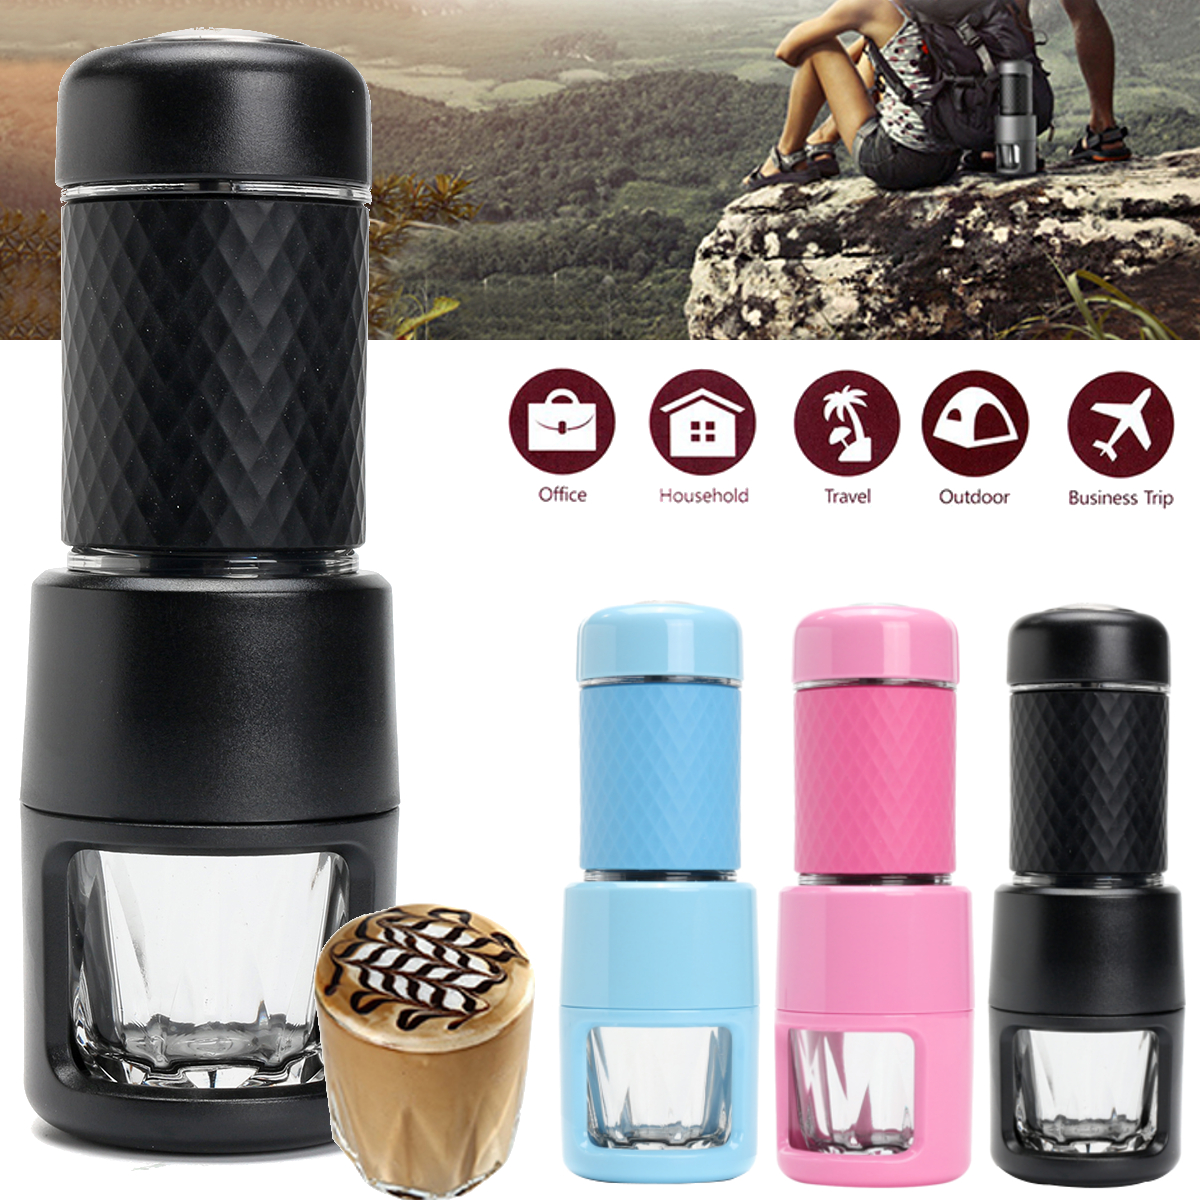 Portable Coffee Maker Travel Handheld Mini Manual Espresso Machine For Outdoor Camping Home Use 47